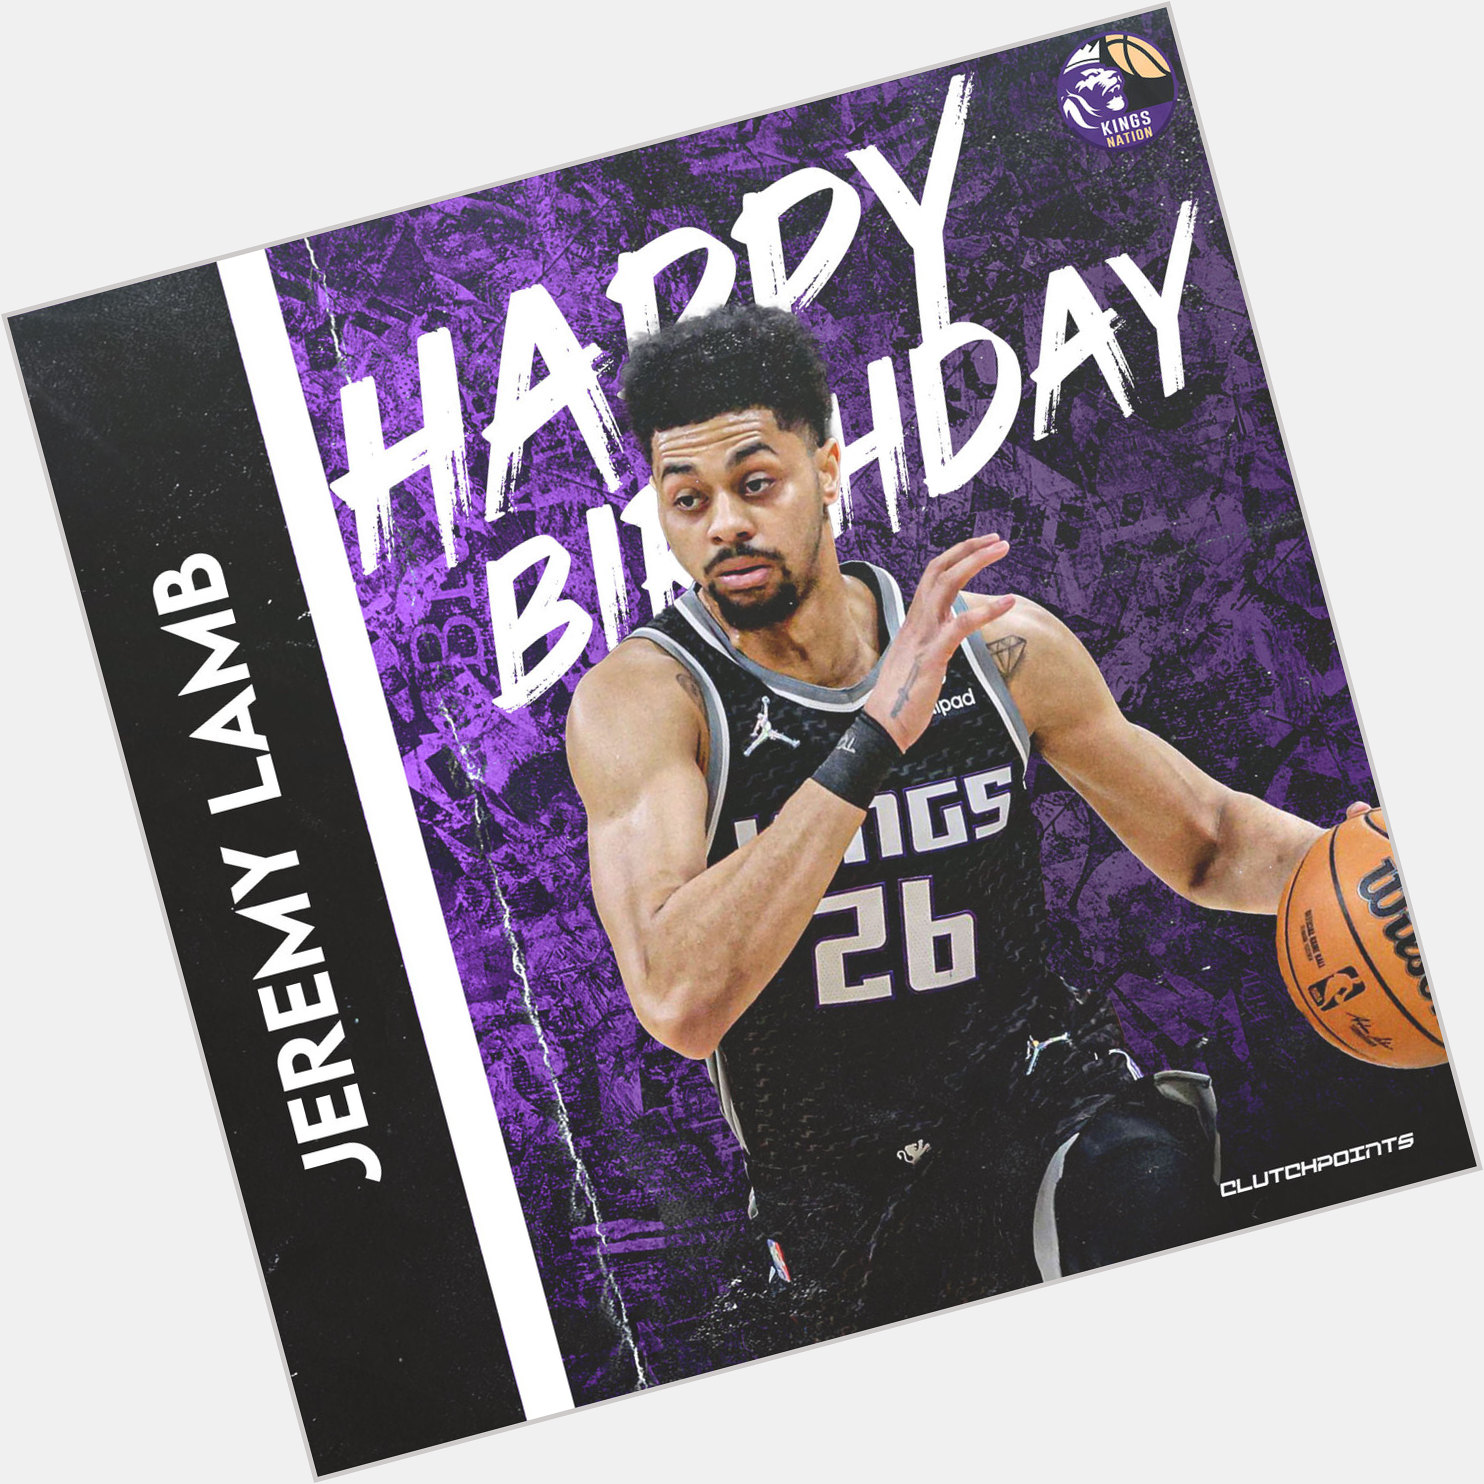 Kings Nation! Let us all greet Jeremy Lamb a happy birthday! 